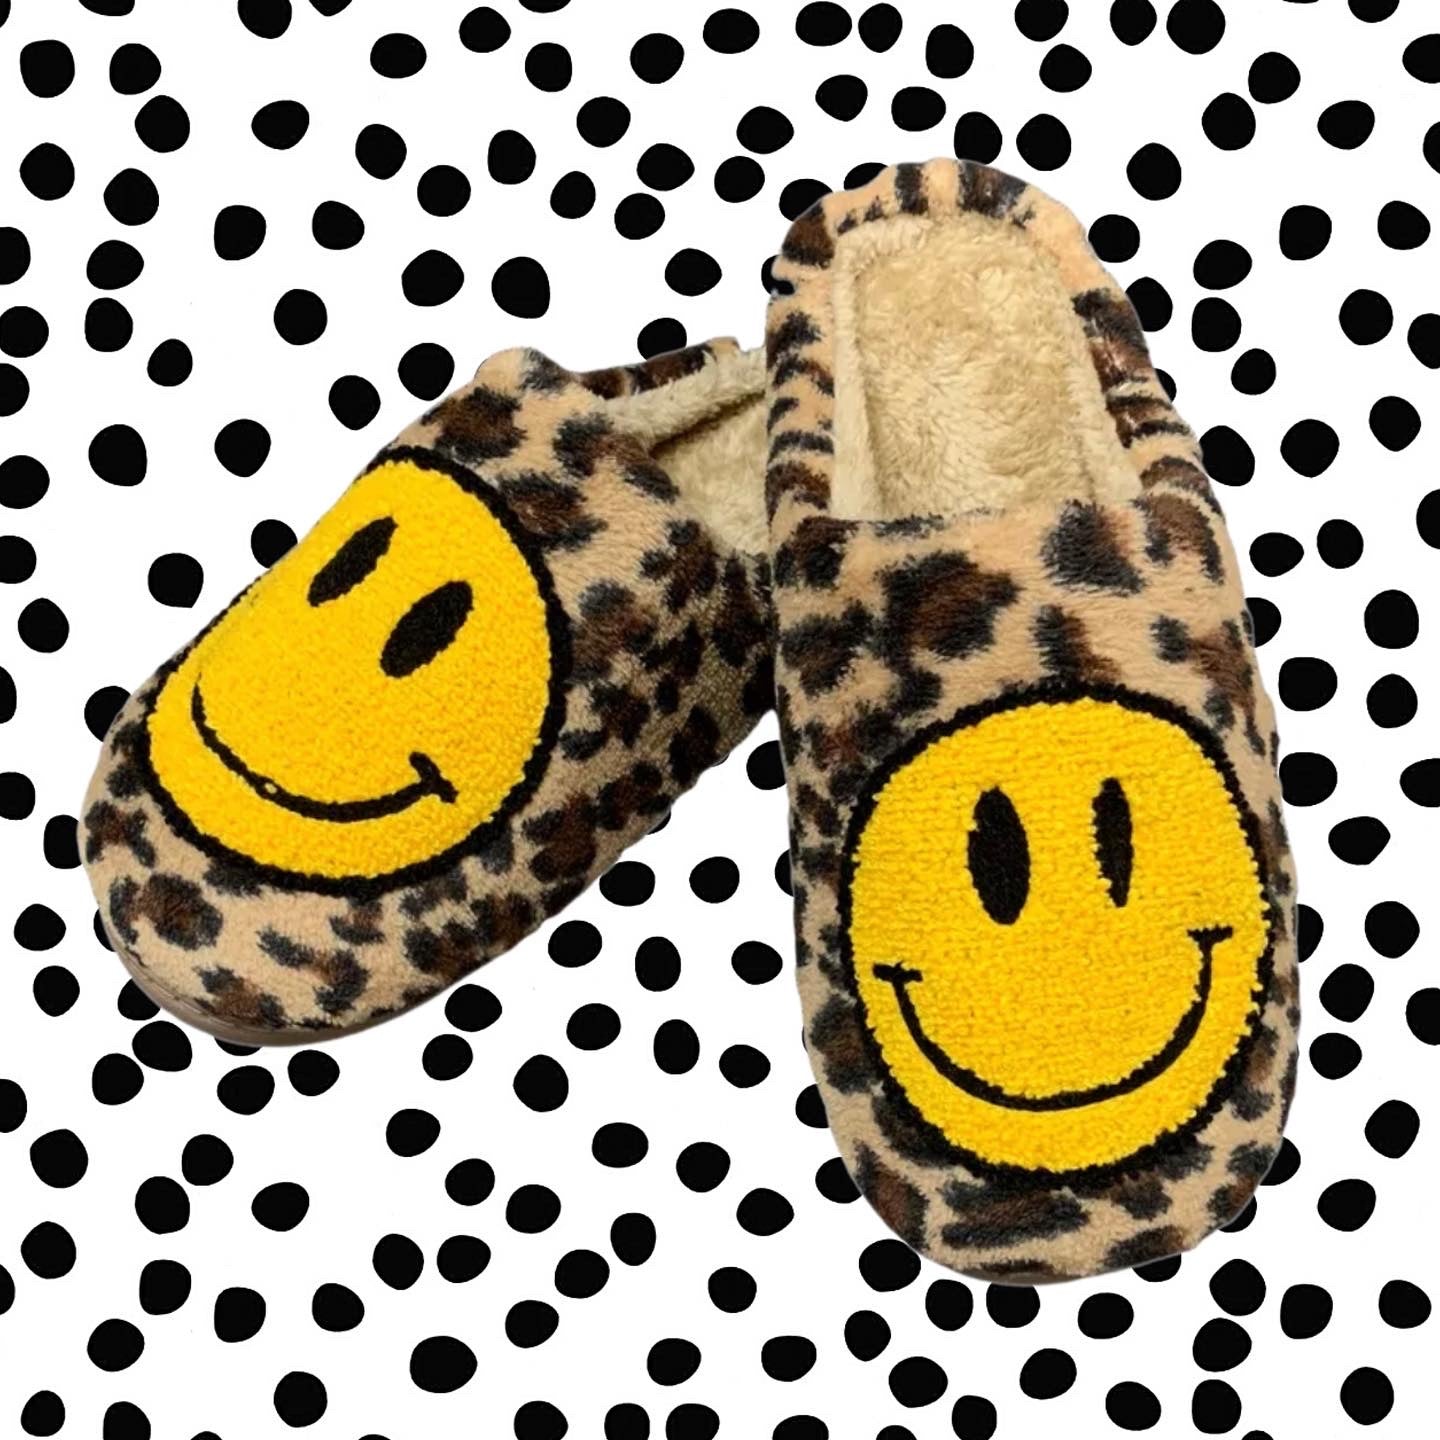 leopard smiley face slippers